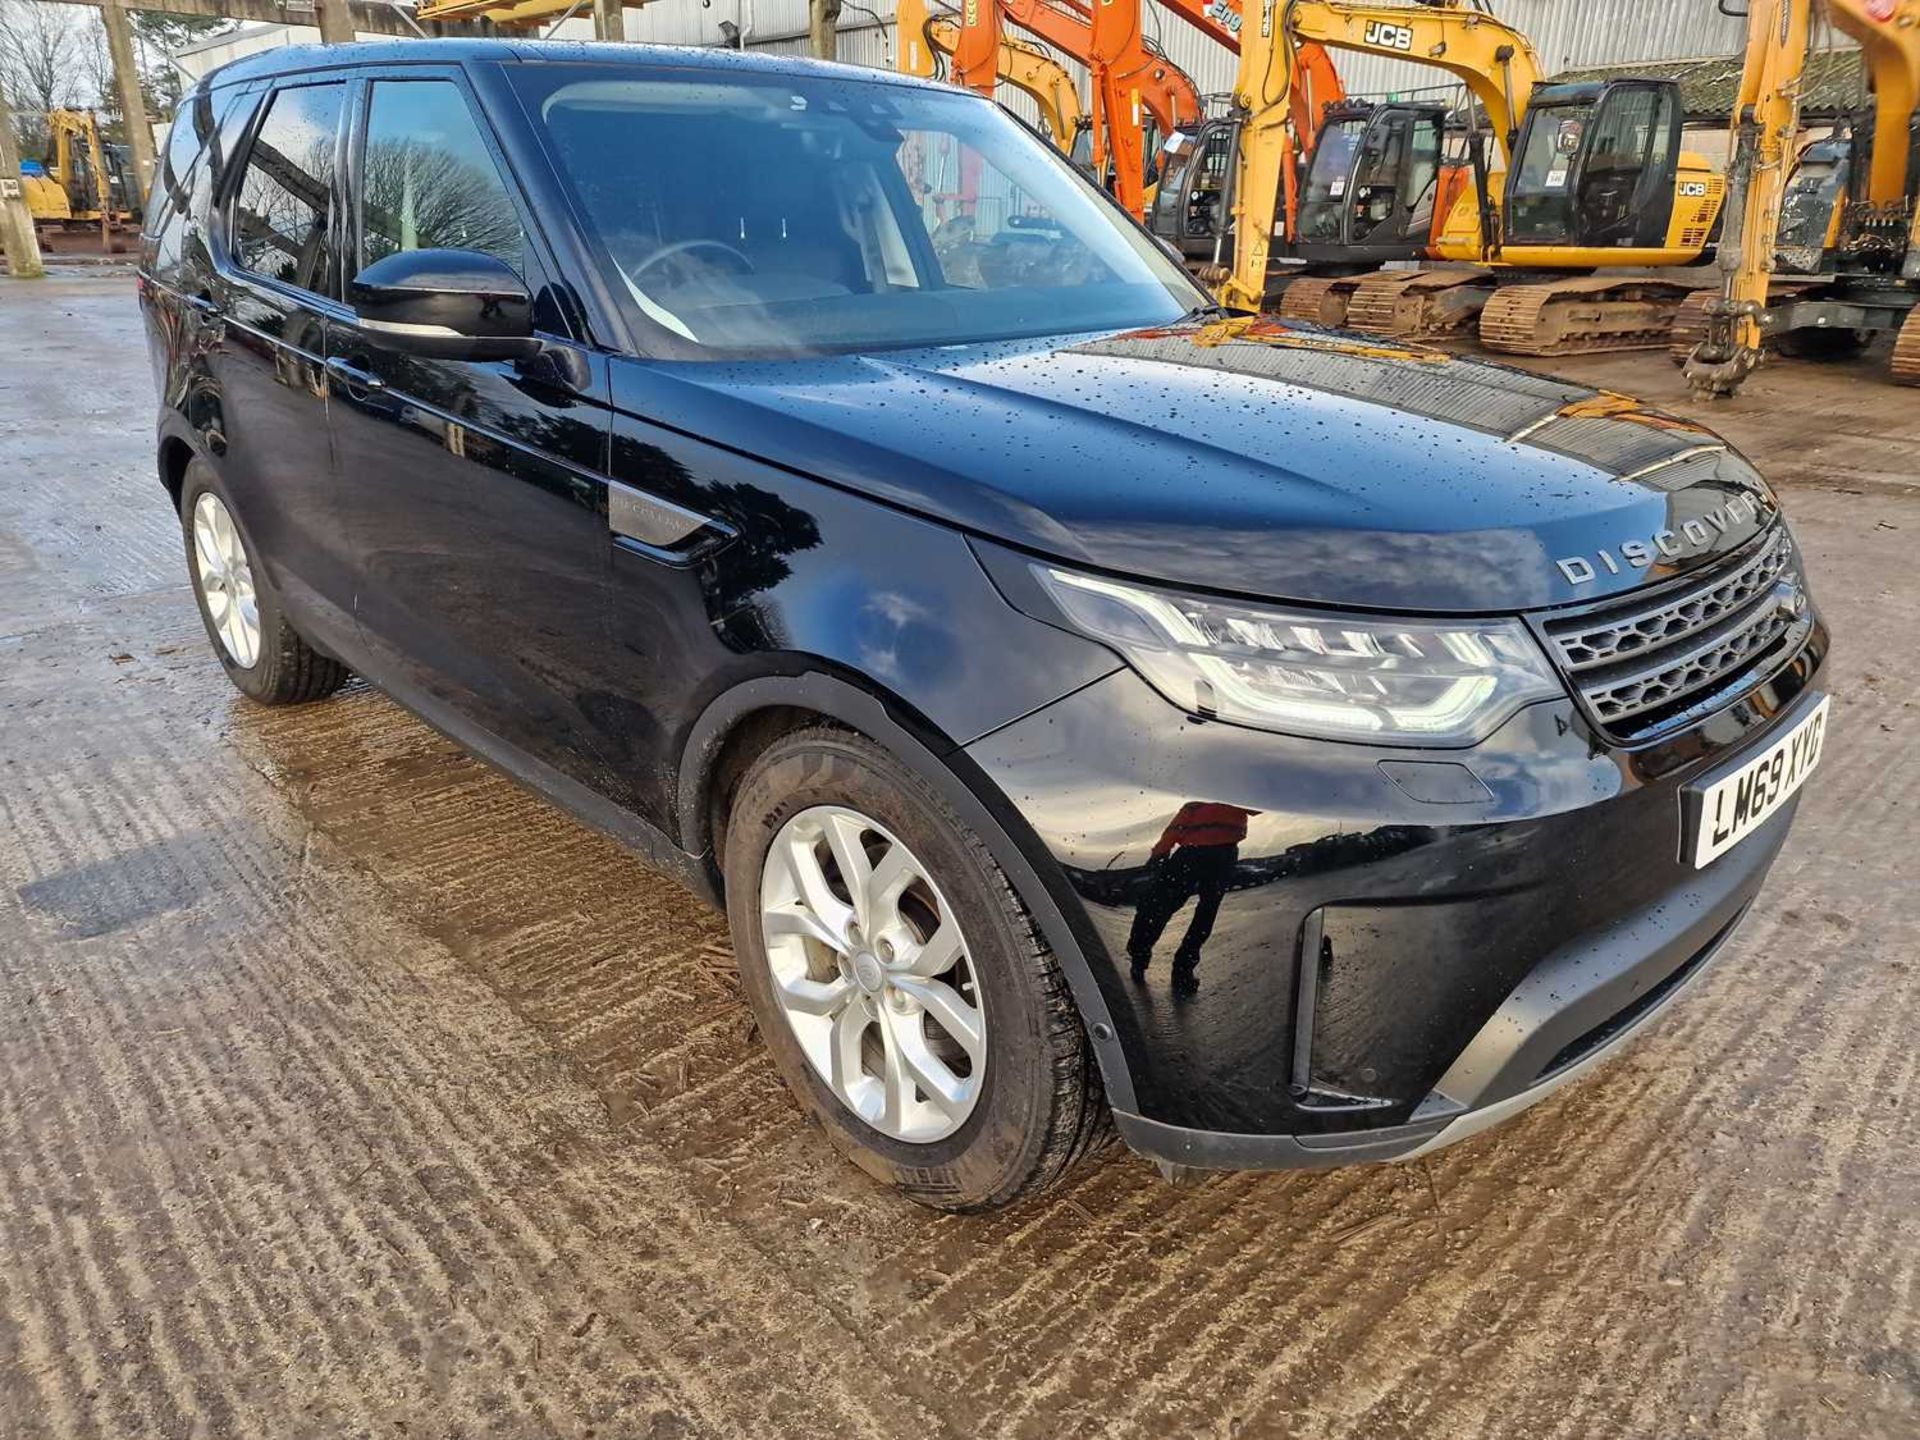 Landrover Discovery SD4 SE 240 Commercial, Auto, Paddle Shift, Sat Nav, Reverse Camera, Parking Sens - Image 33 of 52